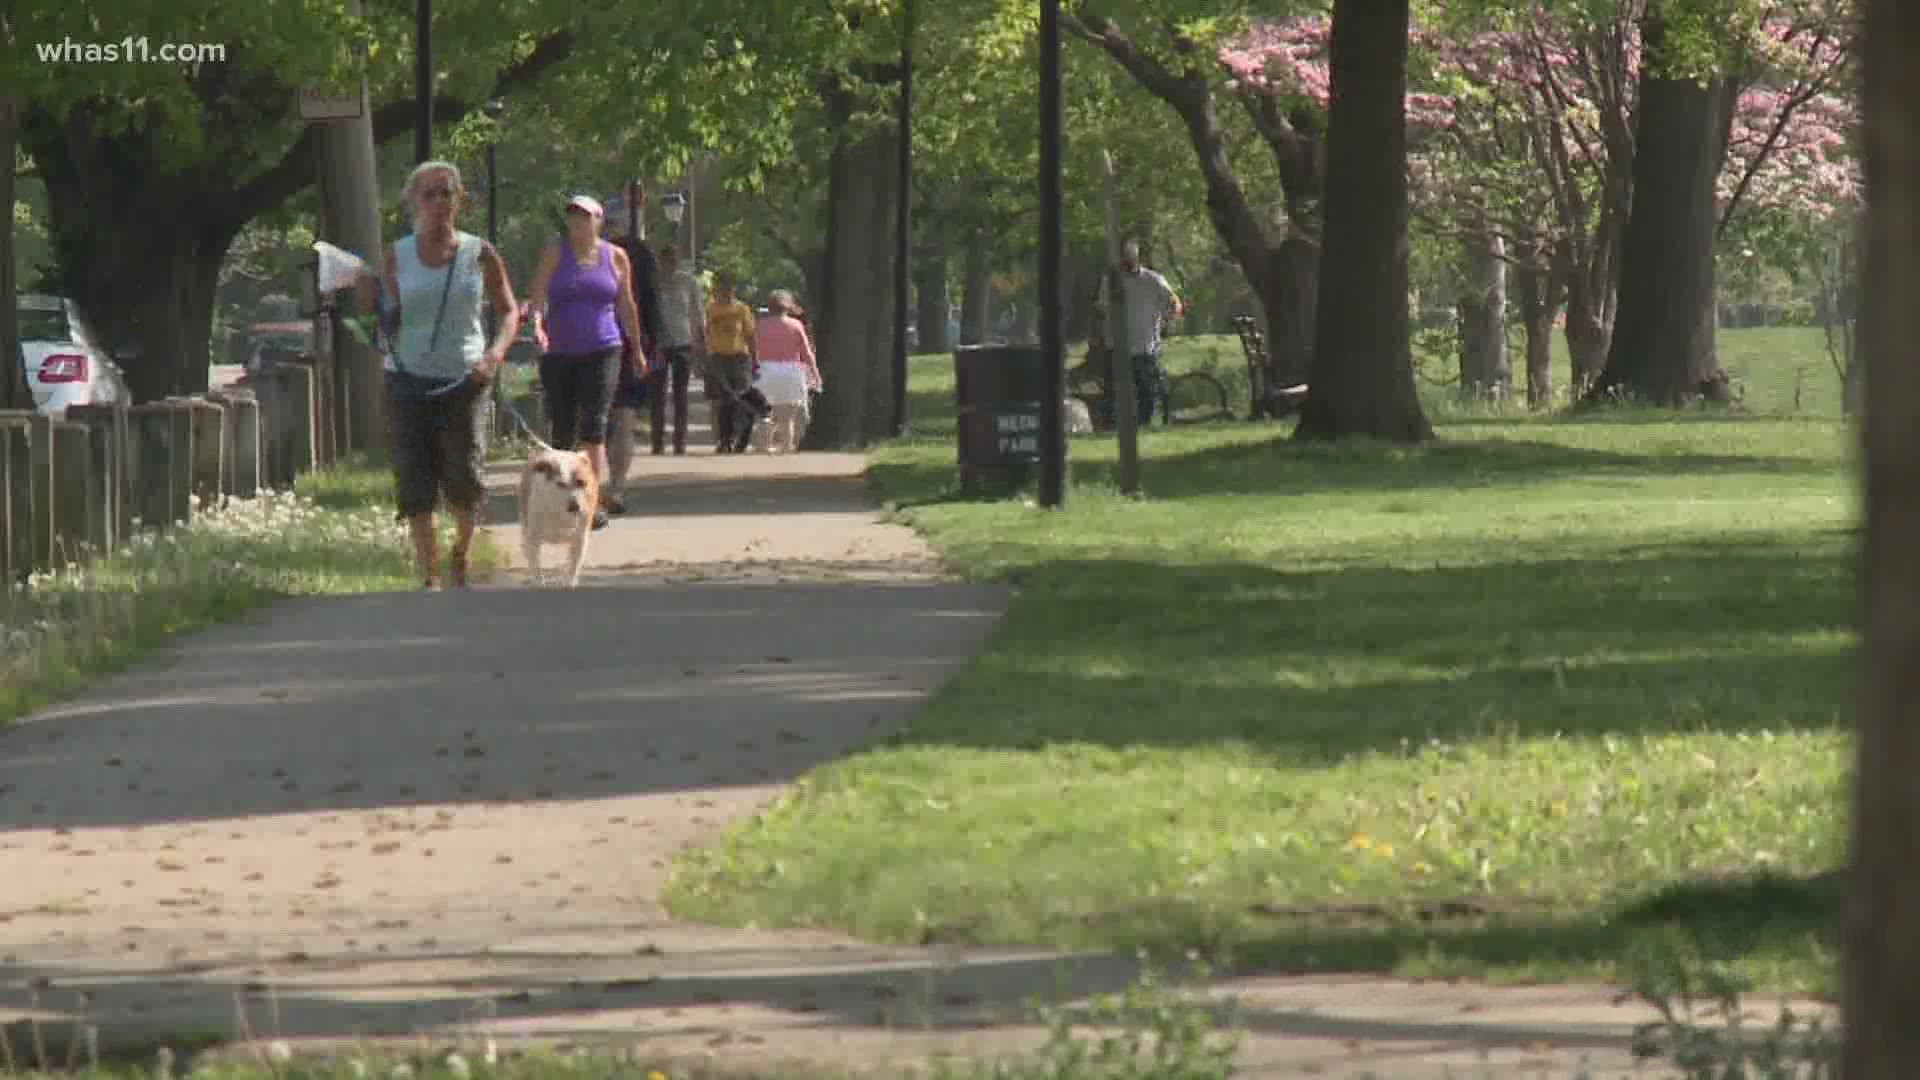 AFSCME is asking the mayor to help keep Metro Parks employees safe.